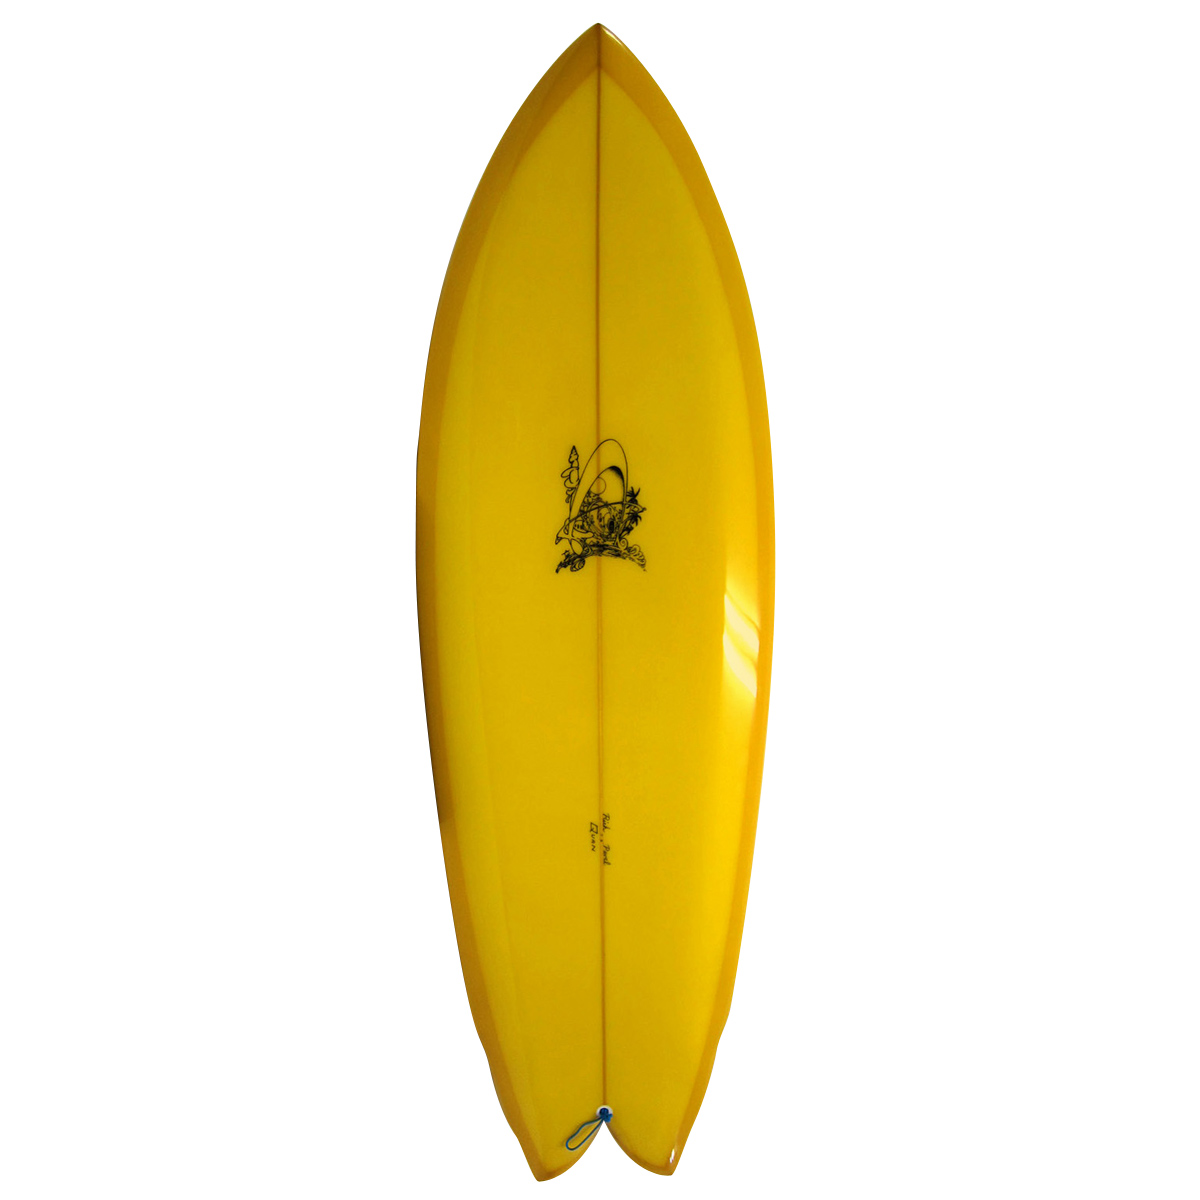 RAINBOW / Quan 5'10　Shaped By Rich Pavel